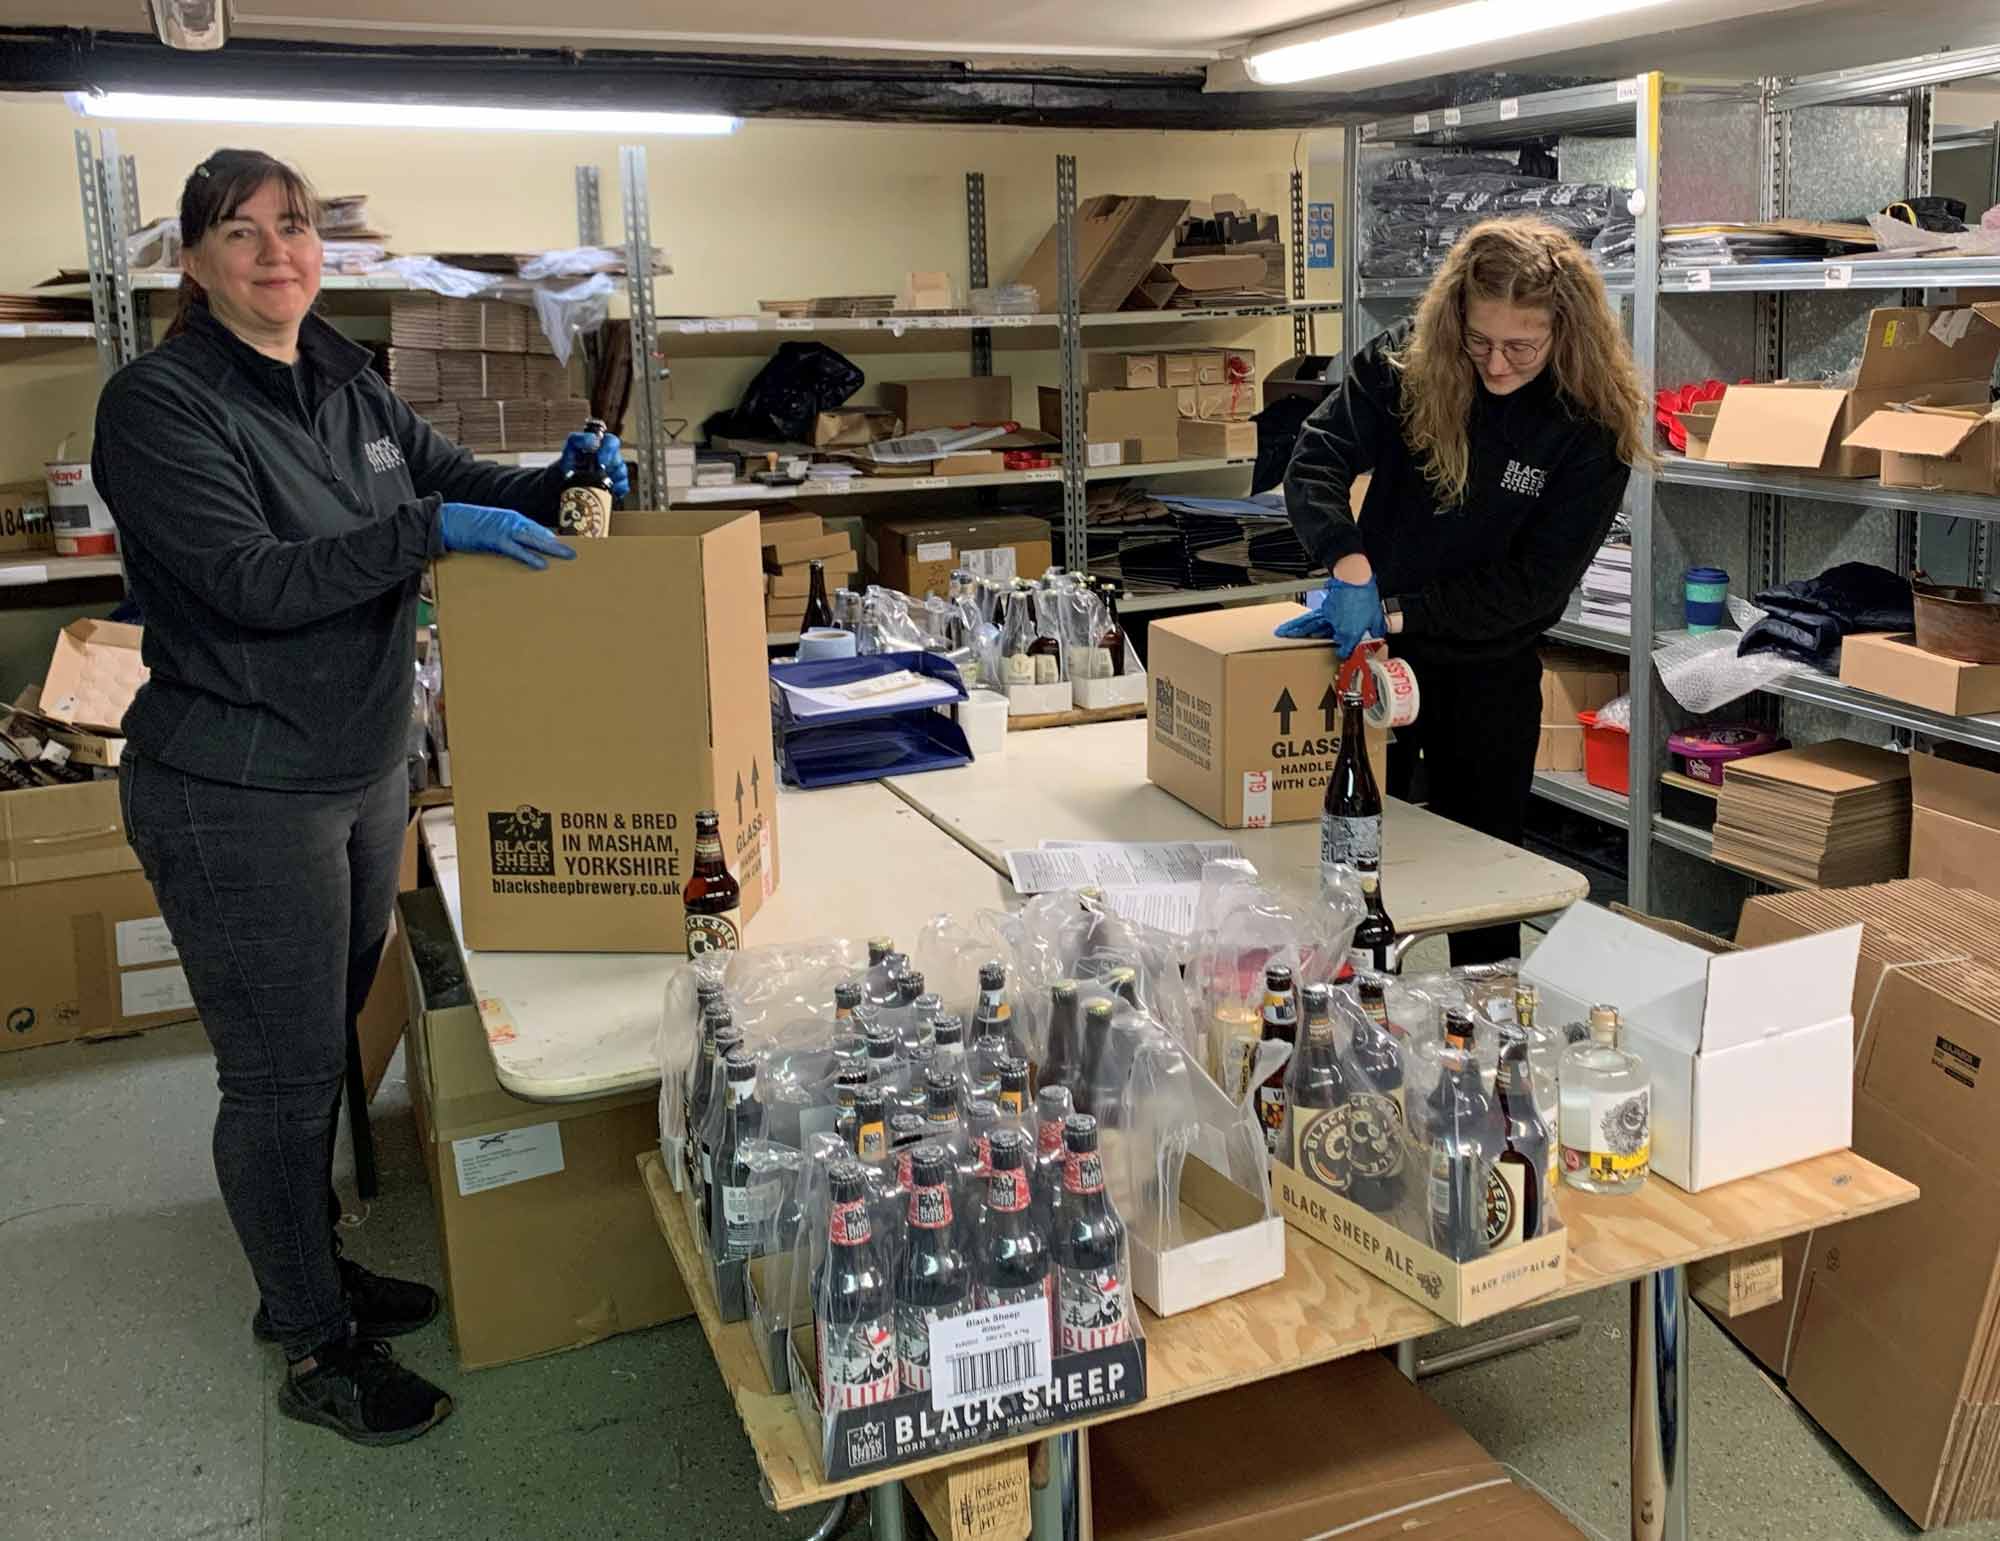 Black Sheep’s Emma Harding and Martha Harding preparing online beer orders ready to be dispatched across the country